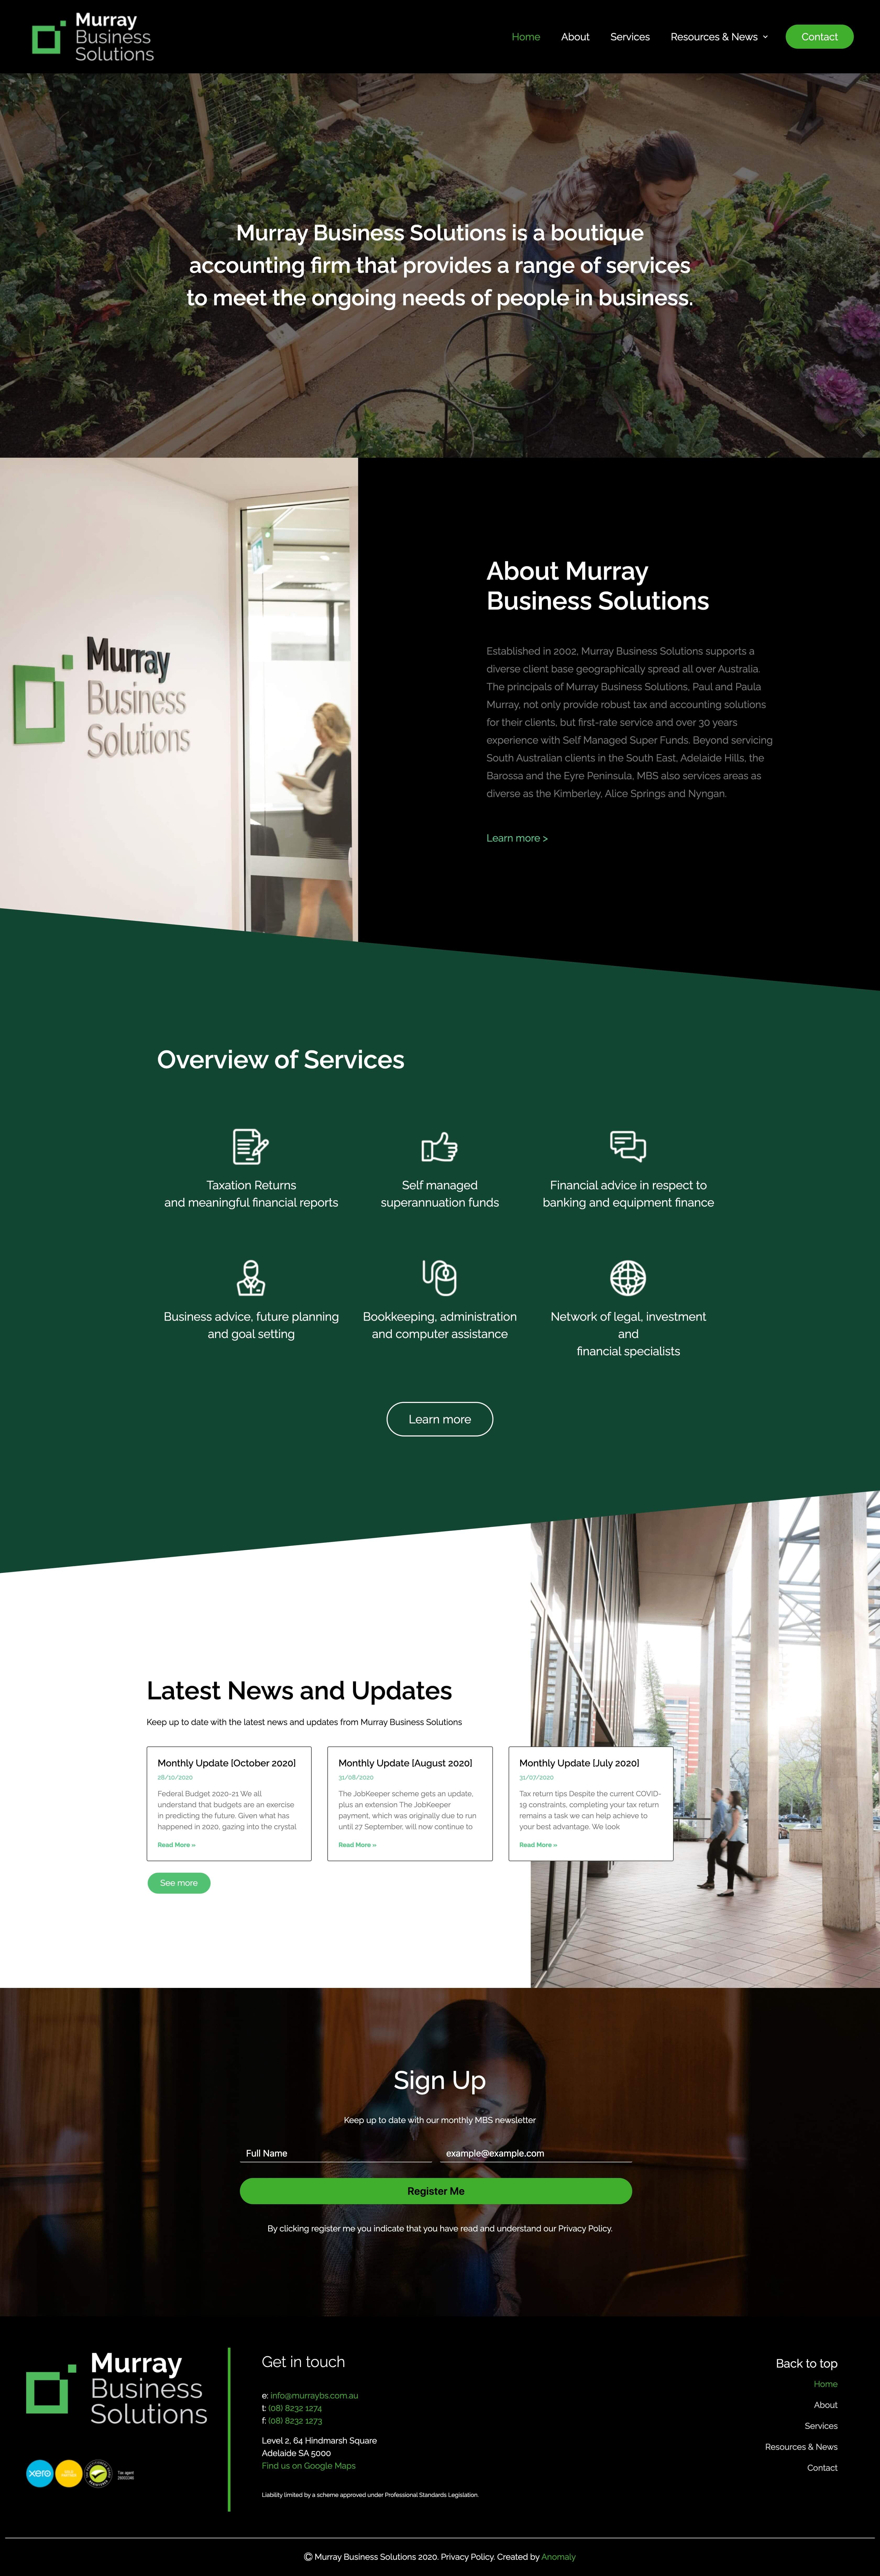 Murray Business Solutions Website Adelaide